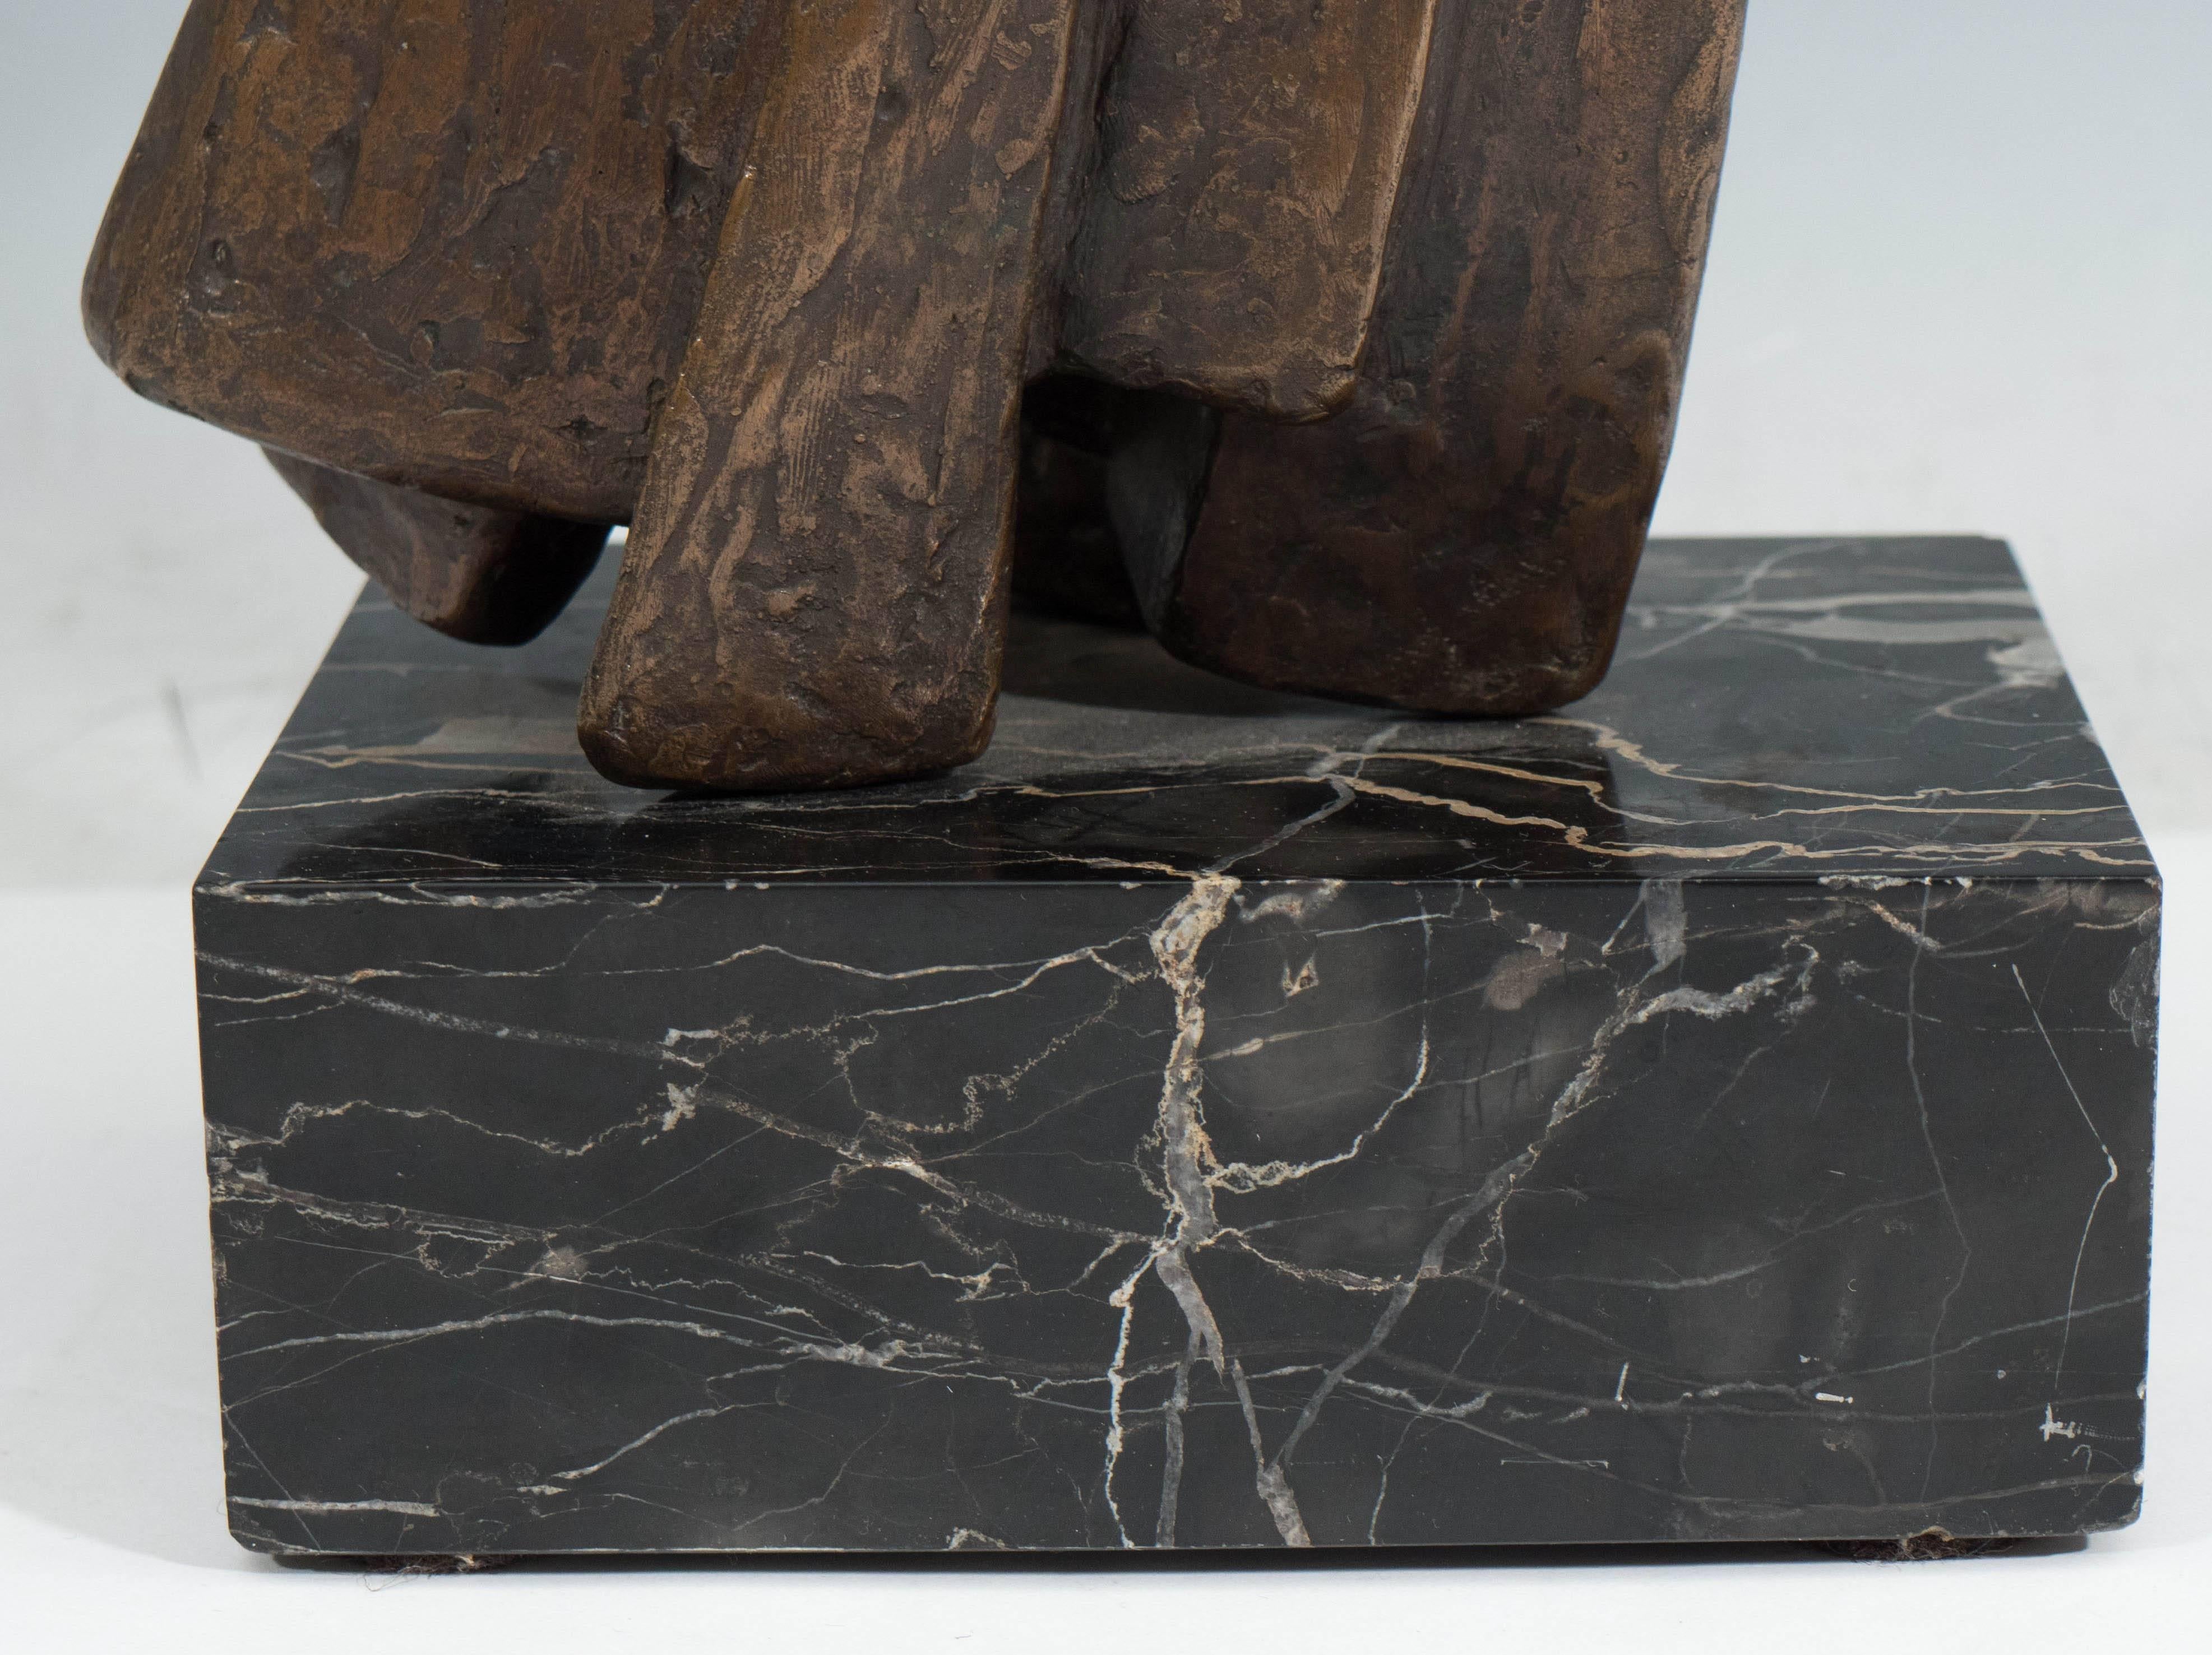 An abstract sculpture in textured bronze, circa 1960s, deftly mounted above a black marble base with veining, signed [D. Angelo A/P]. Both sculpture and base are in very good condition, consistent with age.